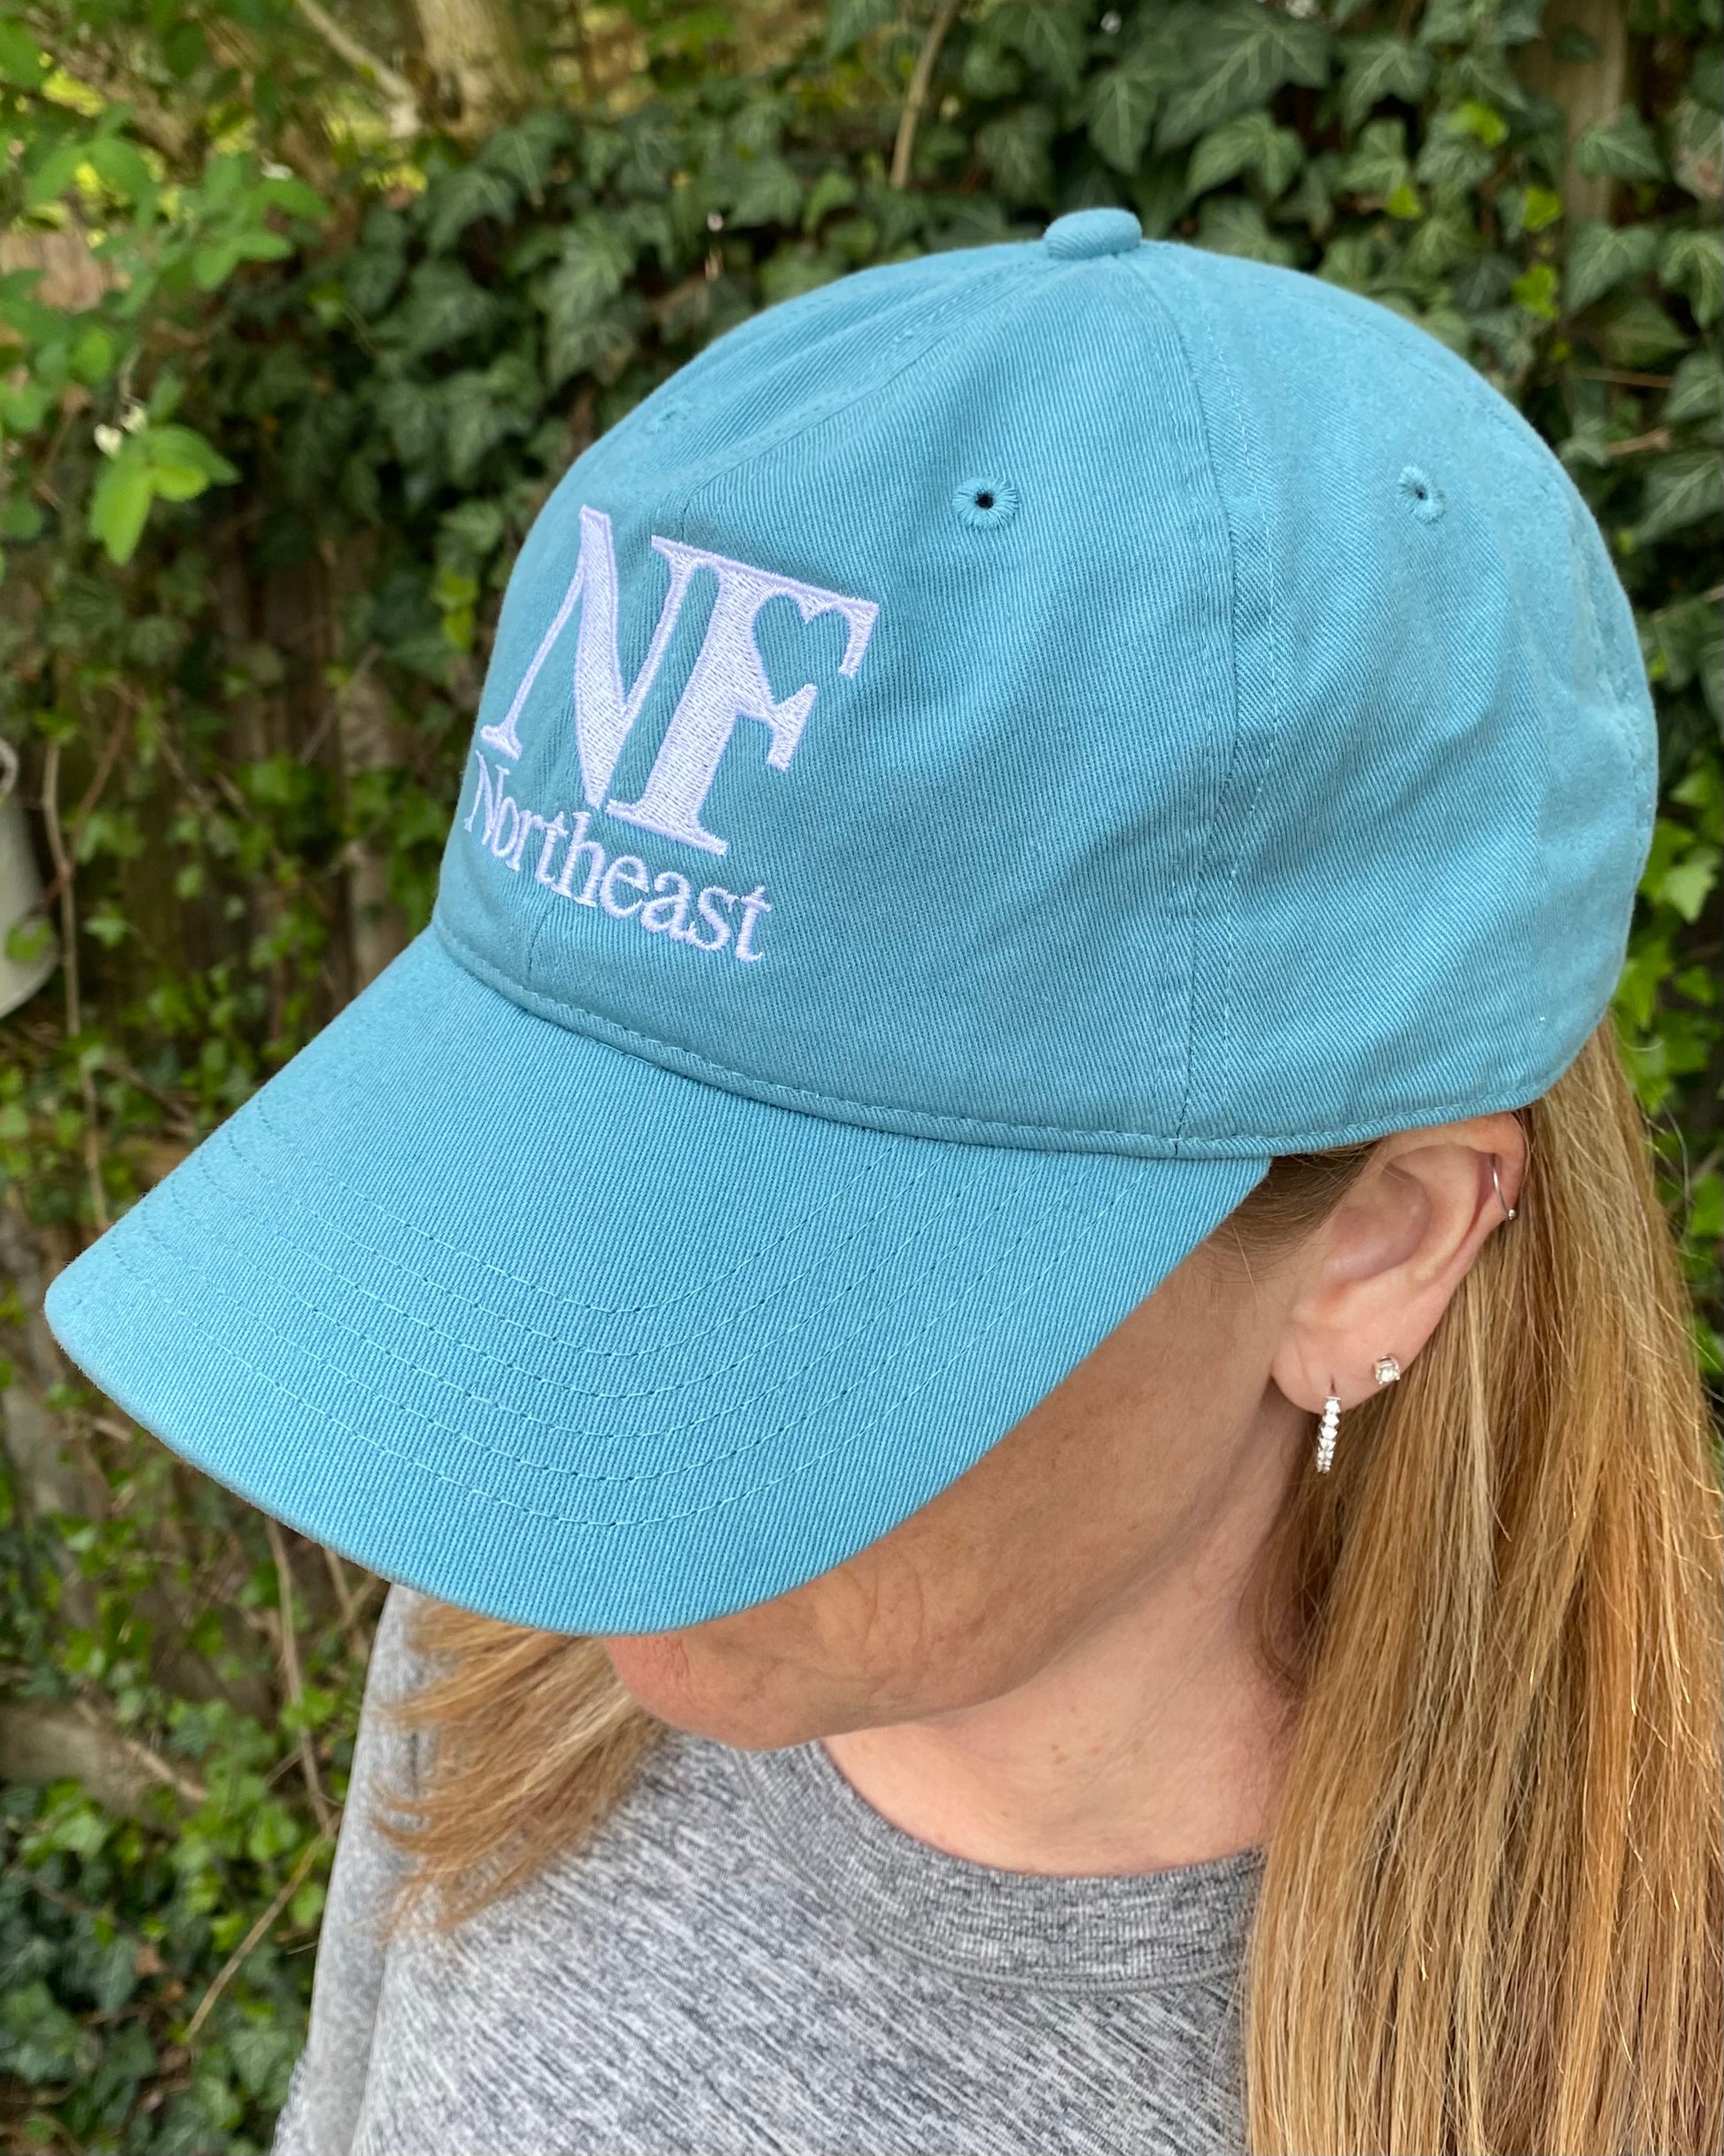 image of teal baseball cap from side with NF Northeast logo embroidered on front of cap